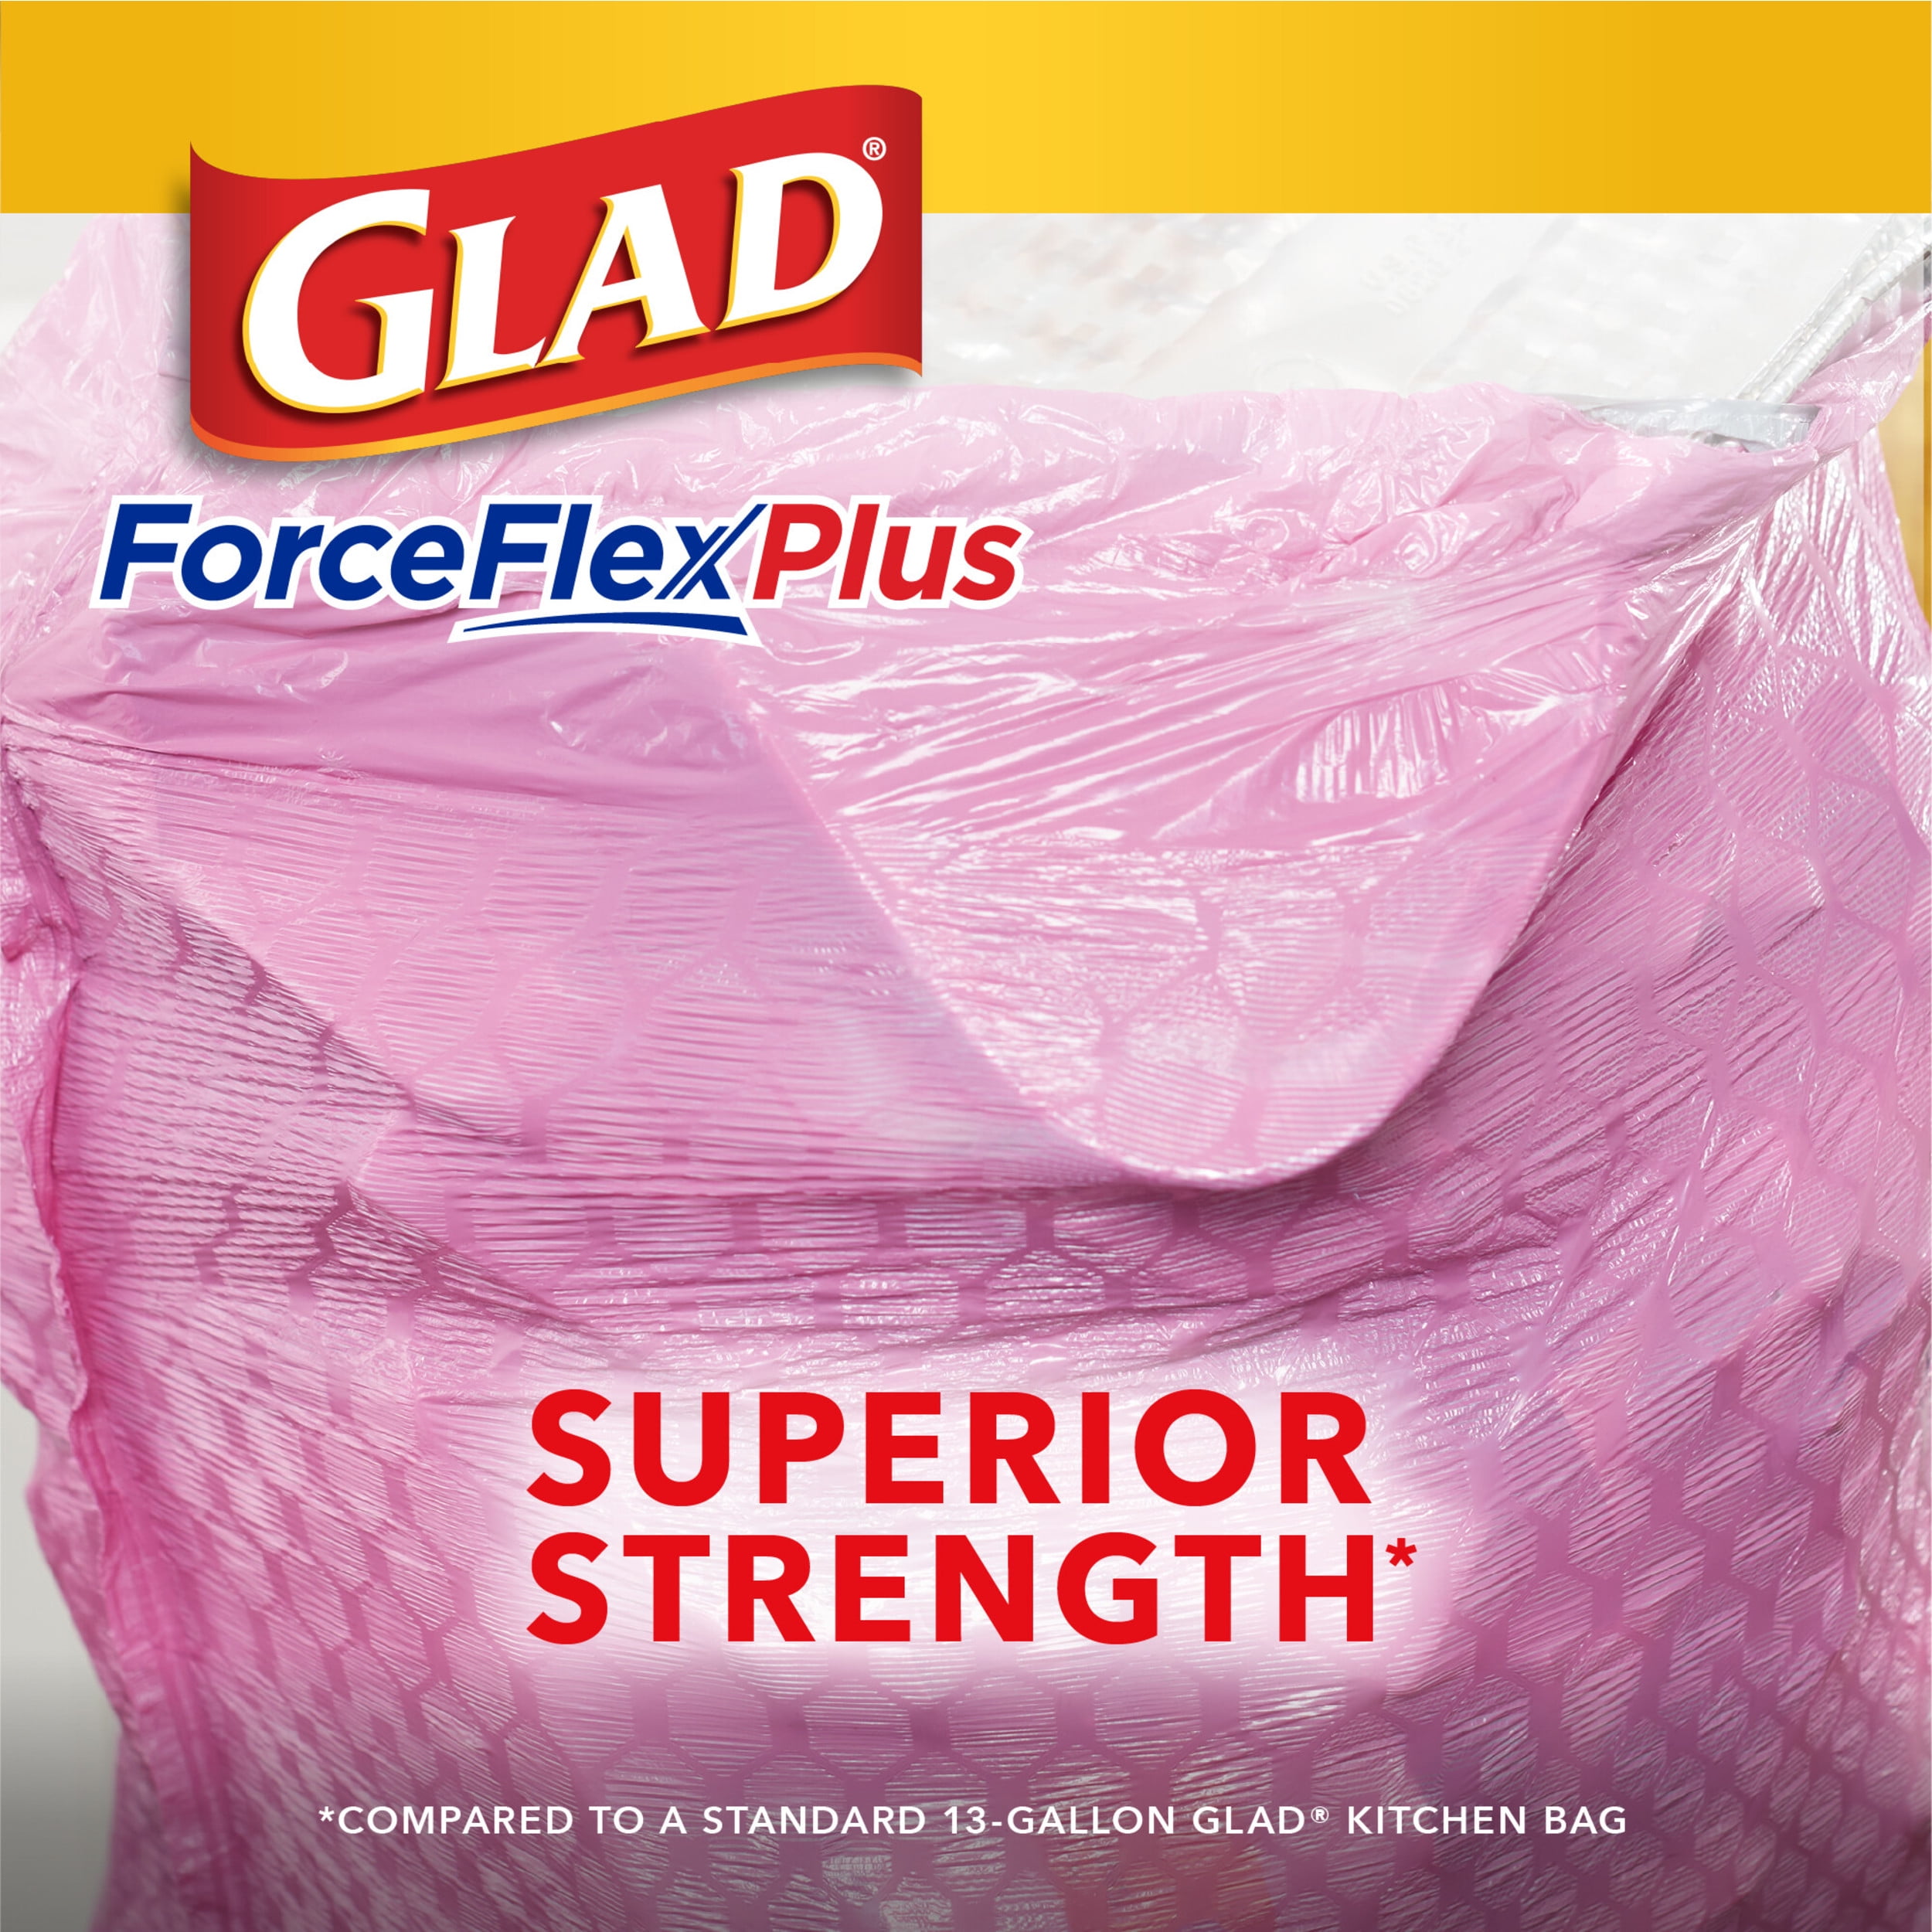 Glad ForceFlex MaxStrength Tall Kitchen Drawstring Trash Bags, 13 Gallon,  Cherry Blossom with Febreze Freshness, 90 Count